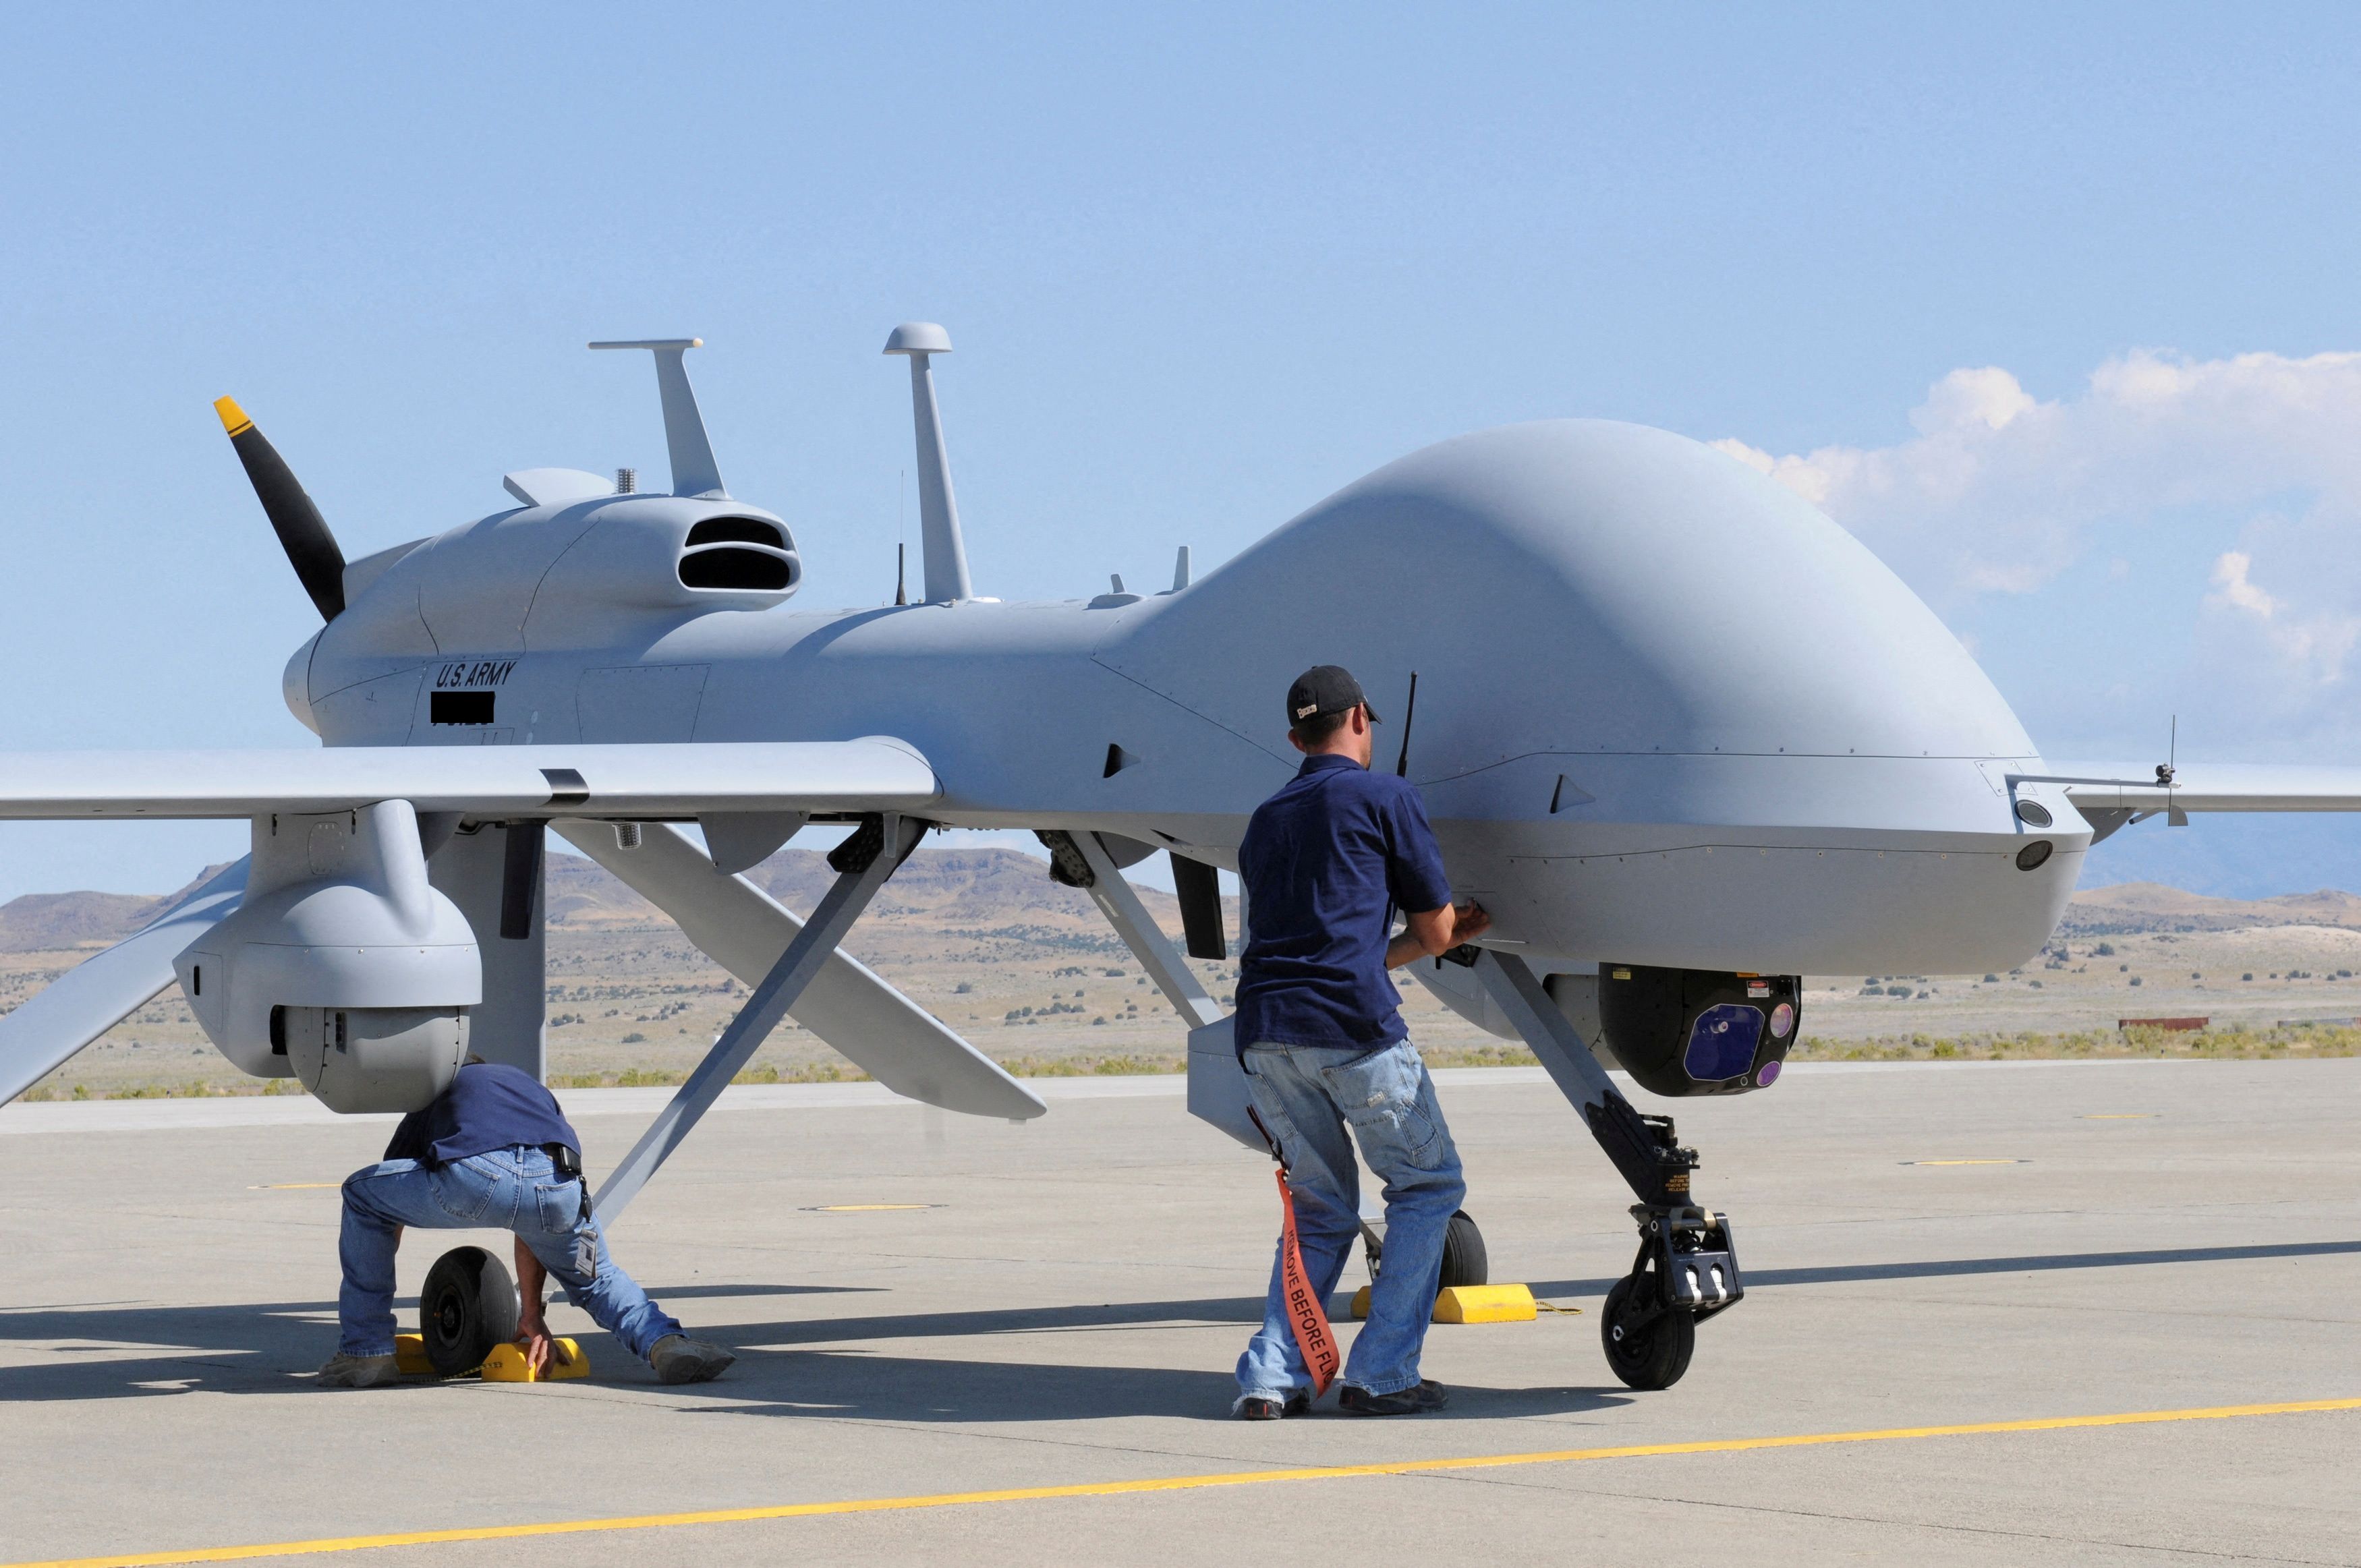 Workers prepare an MQ-1C Gray Eagle unmanned aerial vehicle for static display at Michael Army Airfield, Dugway Proving Ground in Utah in this US Army handout photo